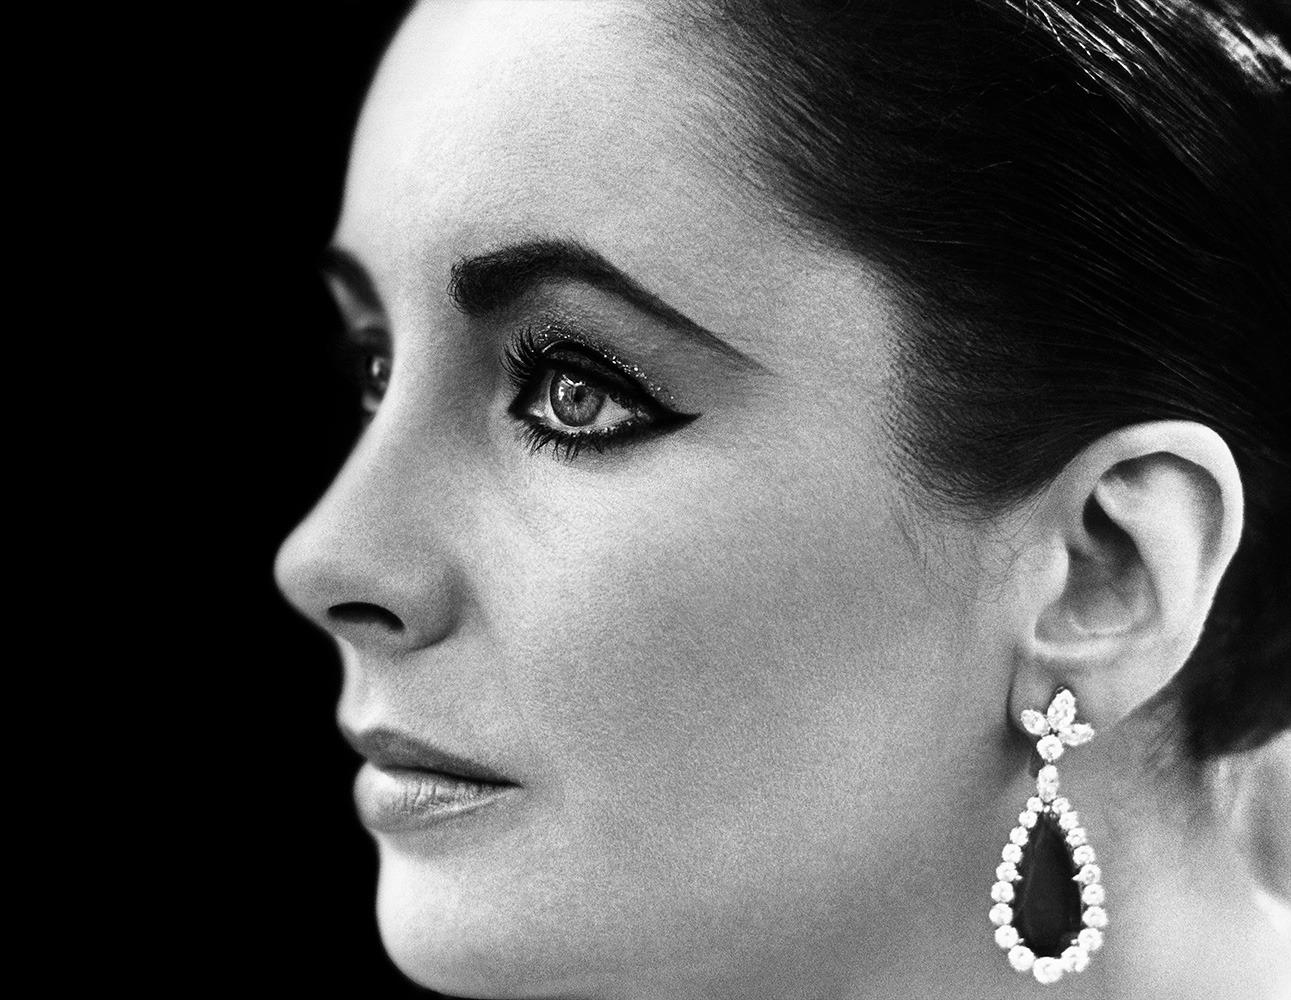 Black and White Photograph David Steen - Elizabeth Taylor - A Studio A, Angleterre, 1963 Limited Estate Print 